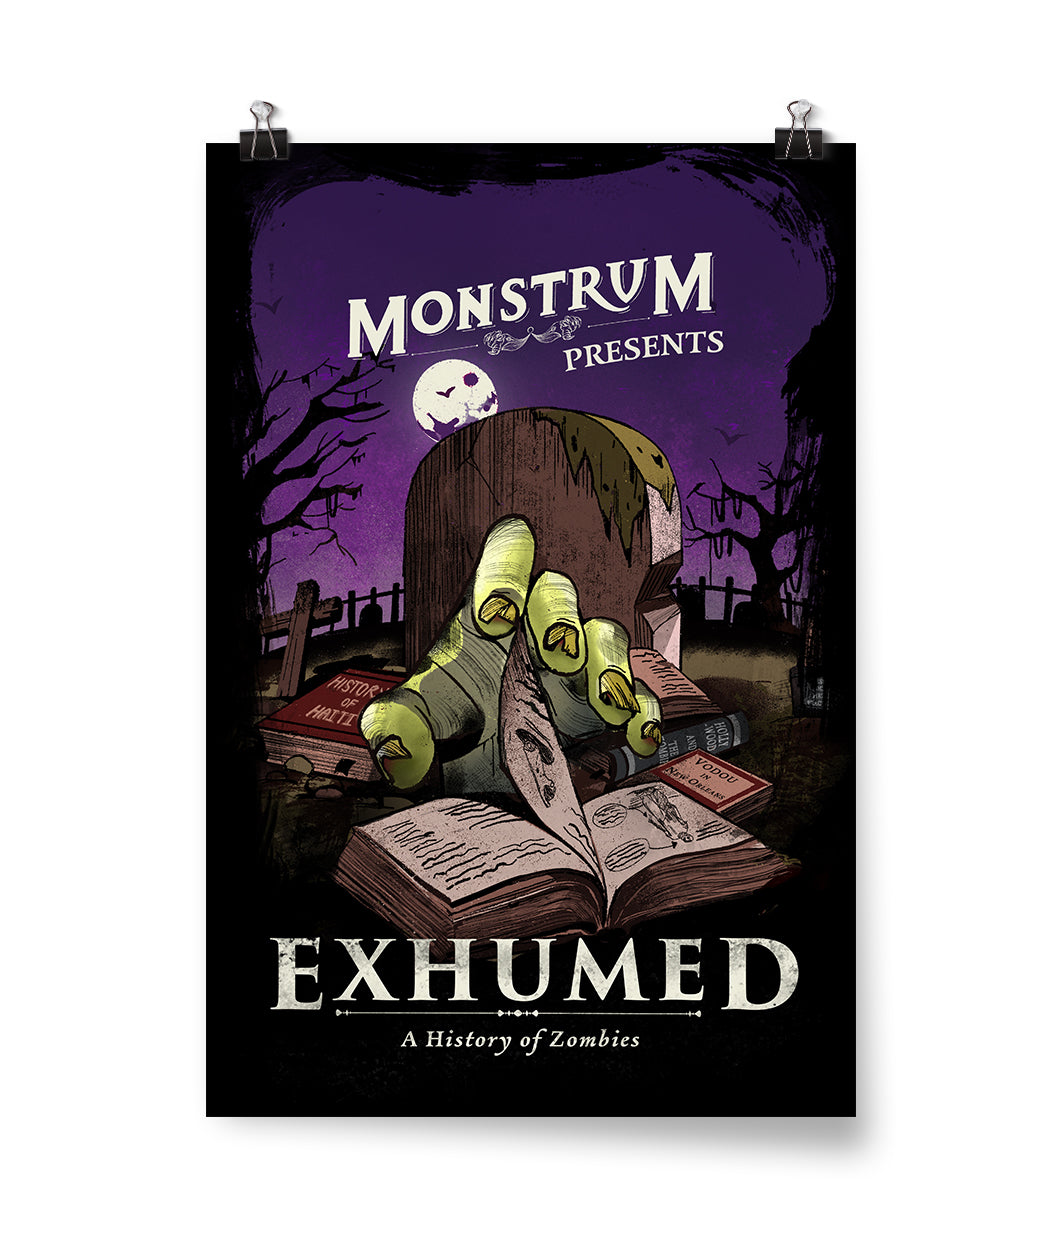 A poster showing a graveyard with silhouetted trees and grave stones and a purple sky in the background. A green hand reaches out from the grave reaching for a book. “Monstrum Presents” is at the top in white serif font with a stylized line below. “Exhumed A history of Zombies” is at the bottom in distressed white serif font - from Monstrum